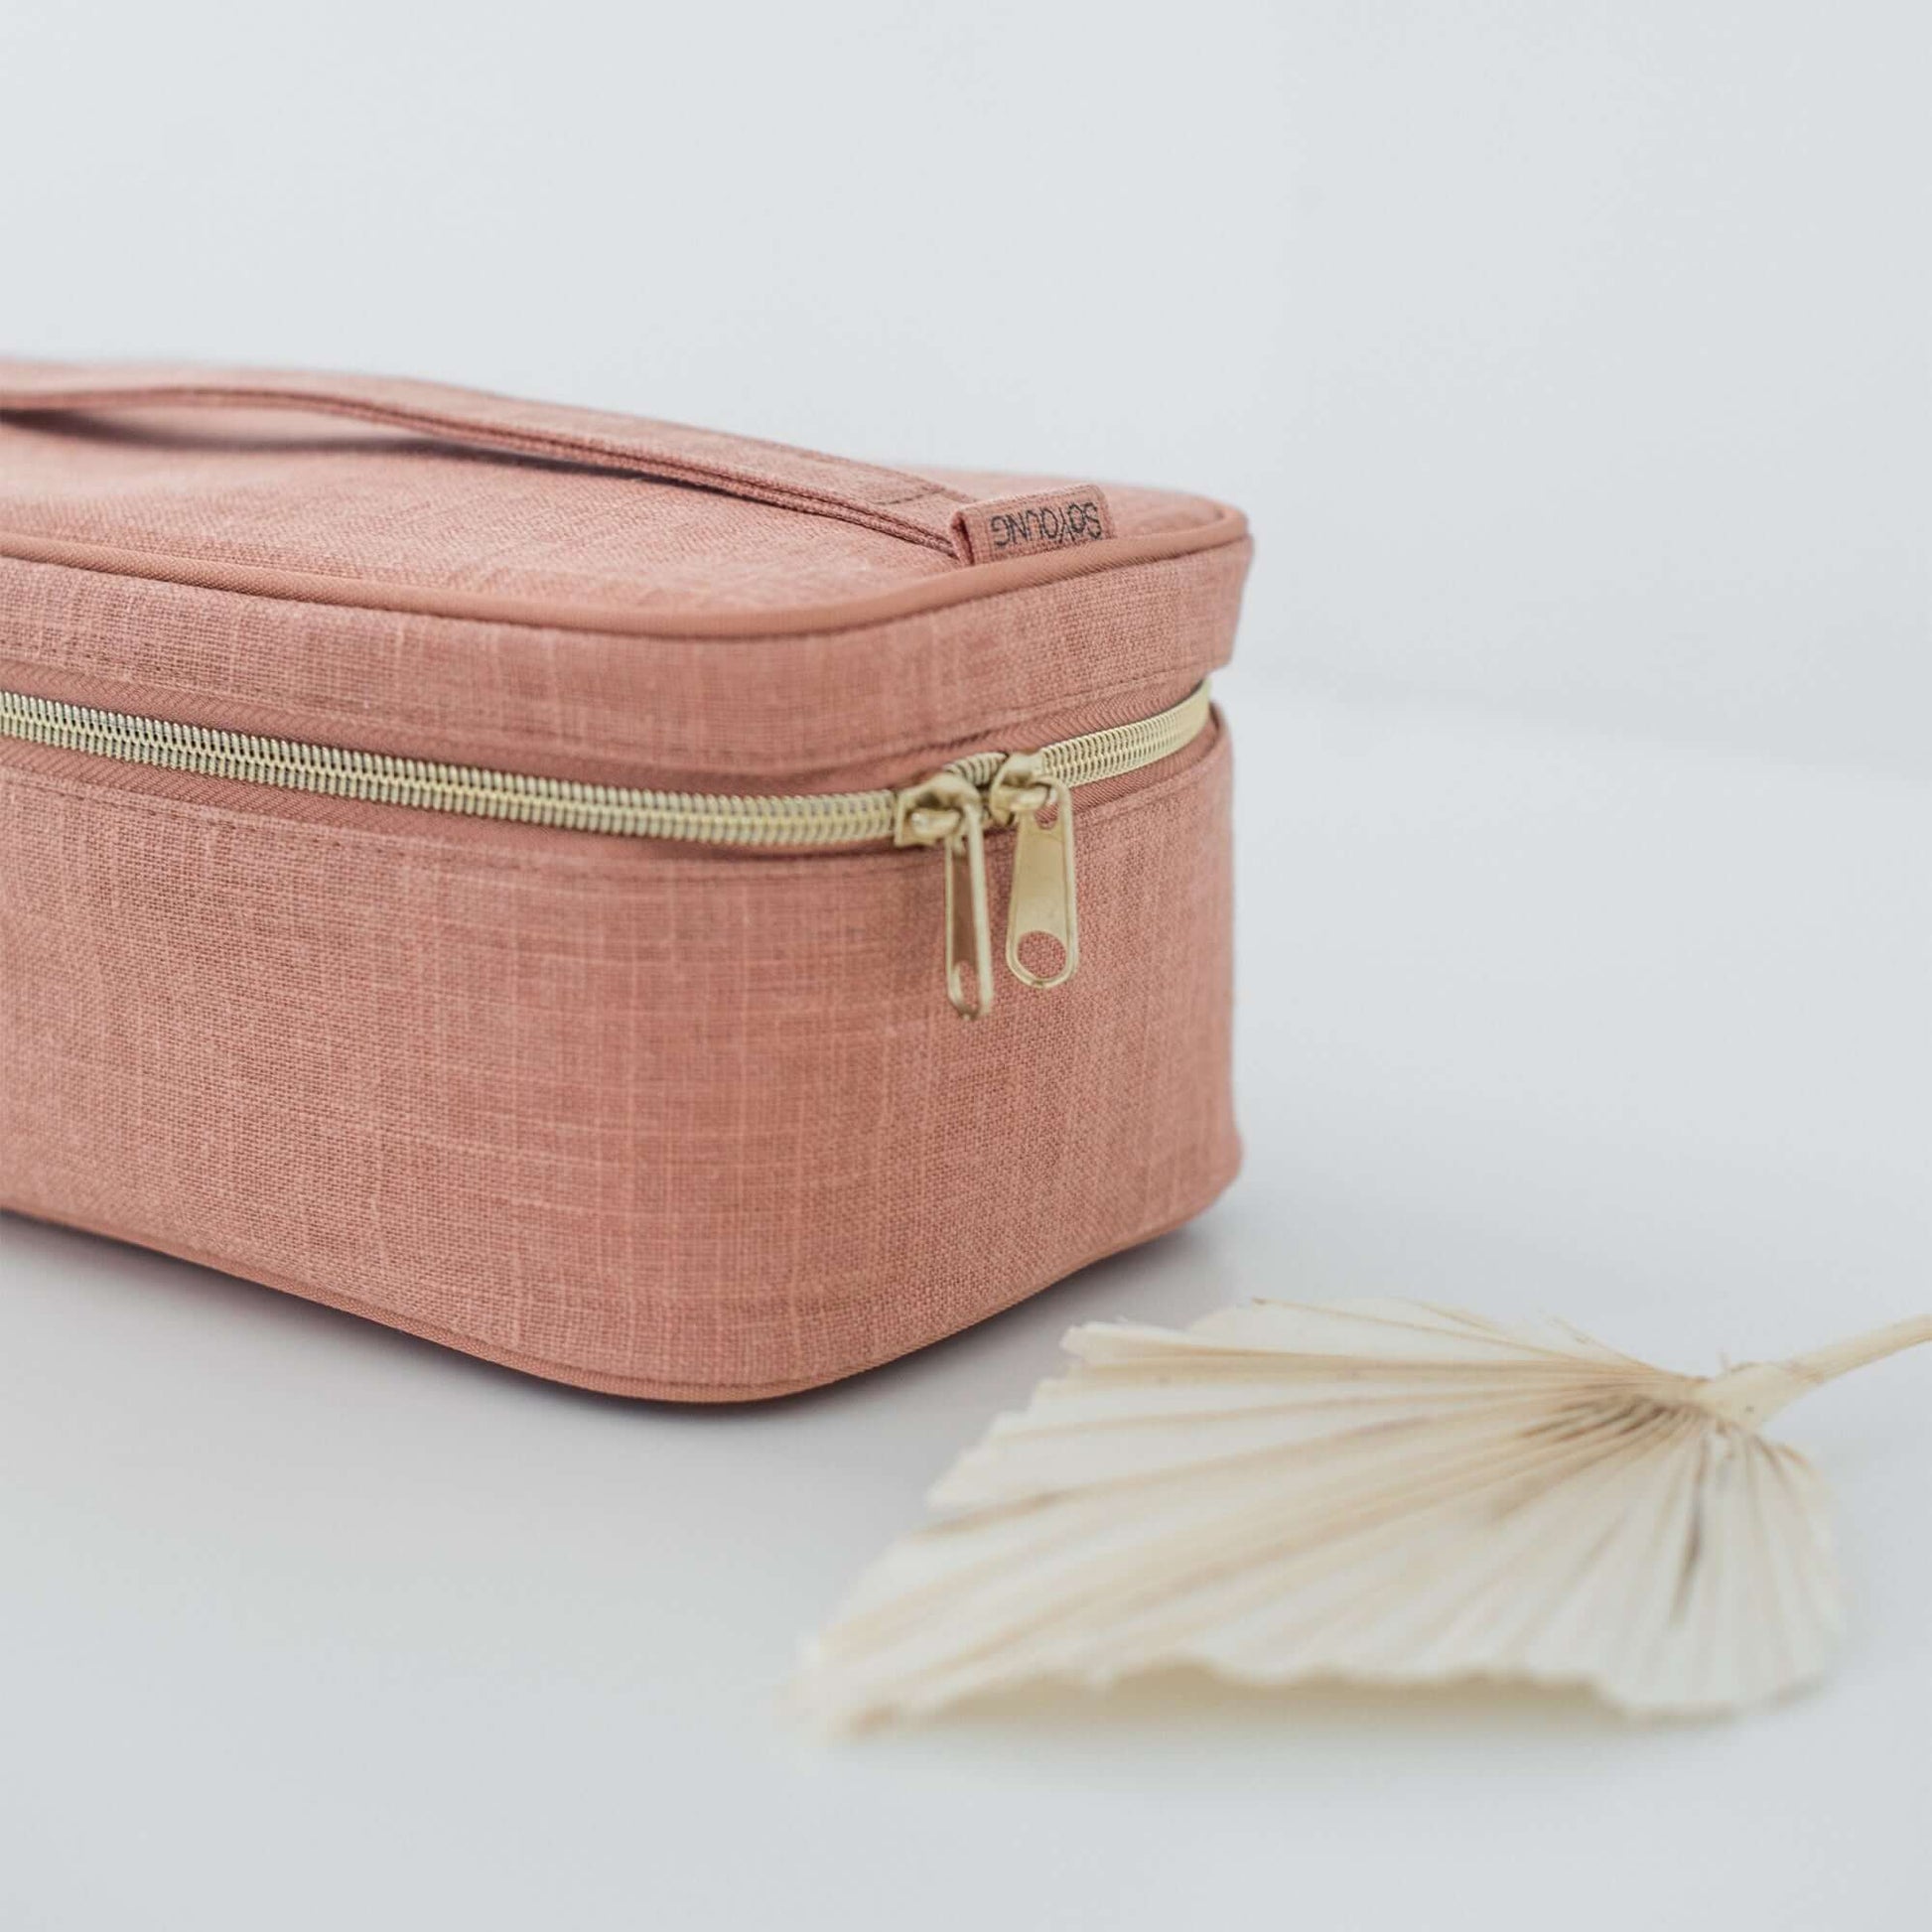 Soyoung Muted Clay Beauty Poche Bag - Ever Simplicity